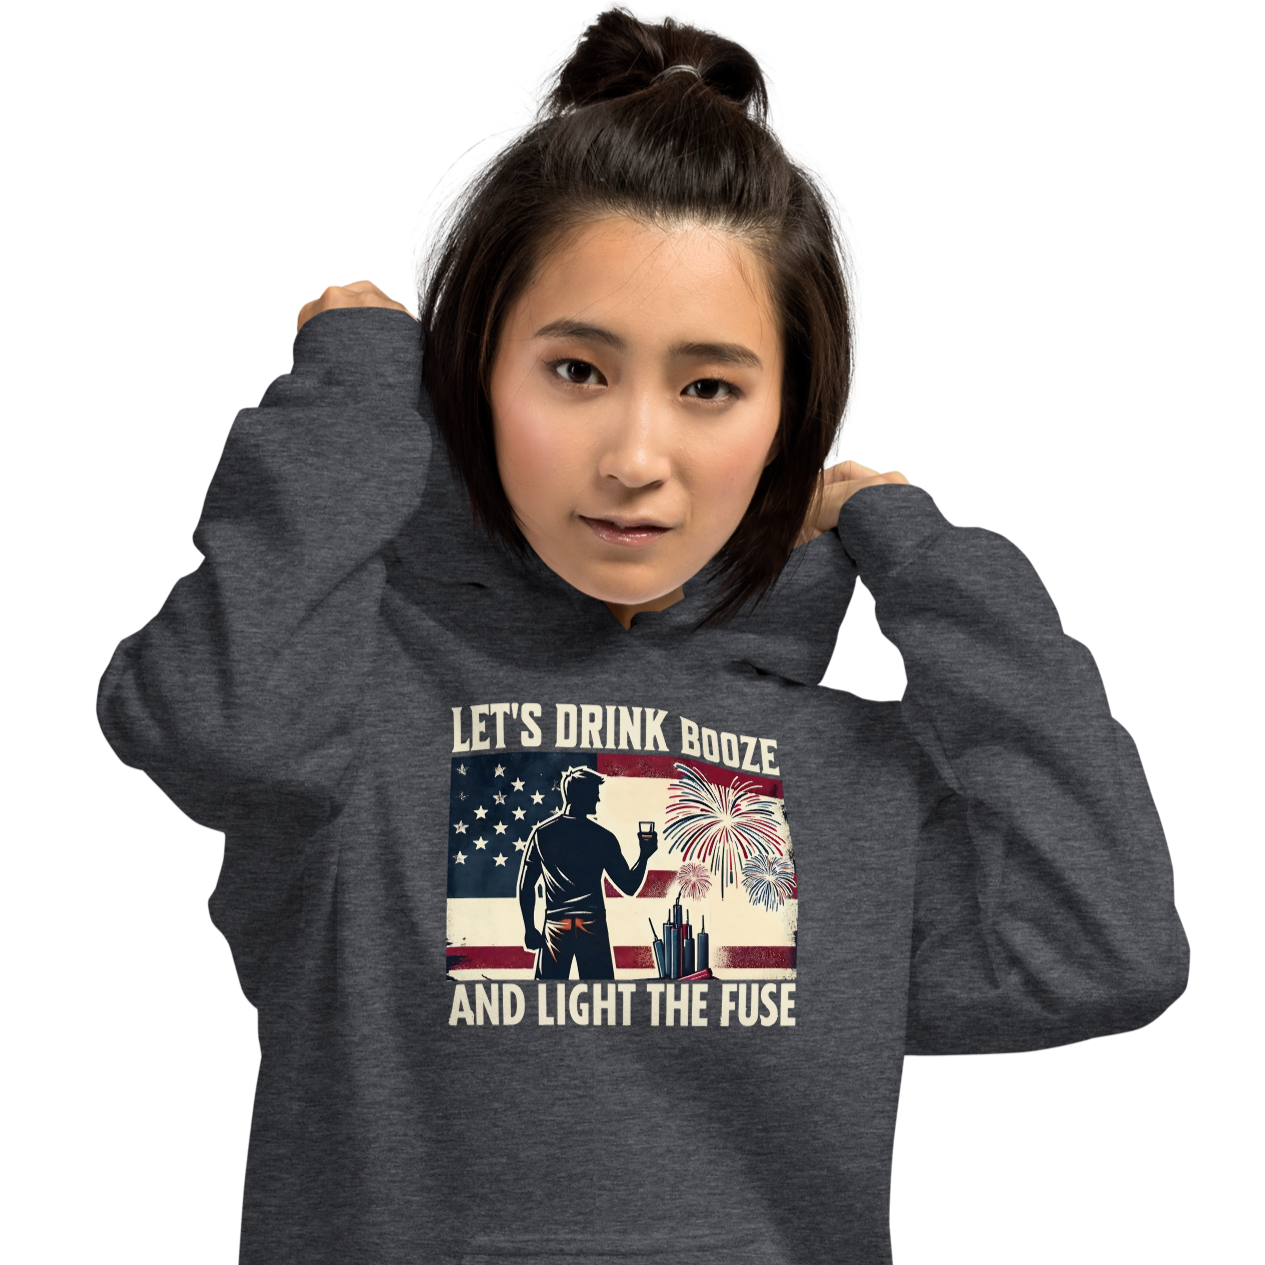 Let's Drink Booze and Light the Fuse Hoodie - Patriotic Apparel for the 4th of July